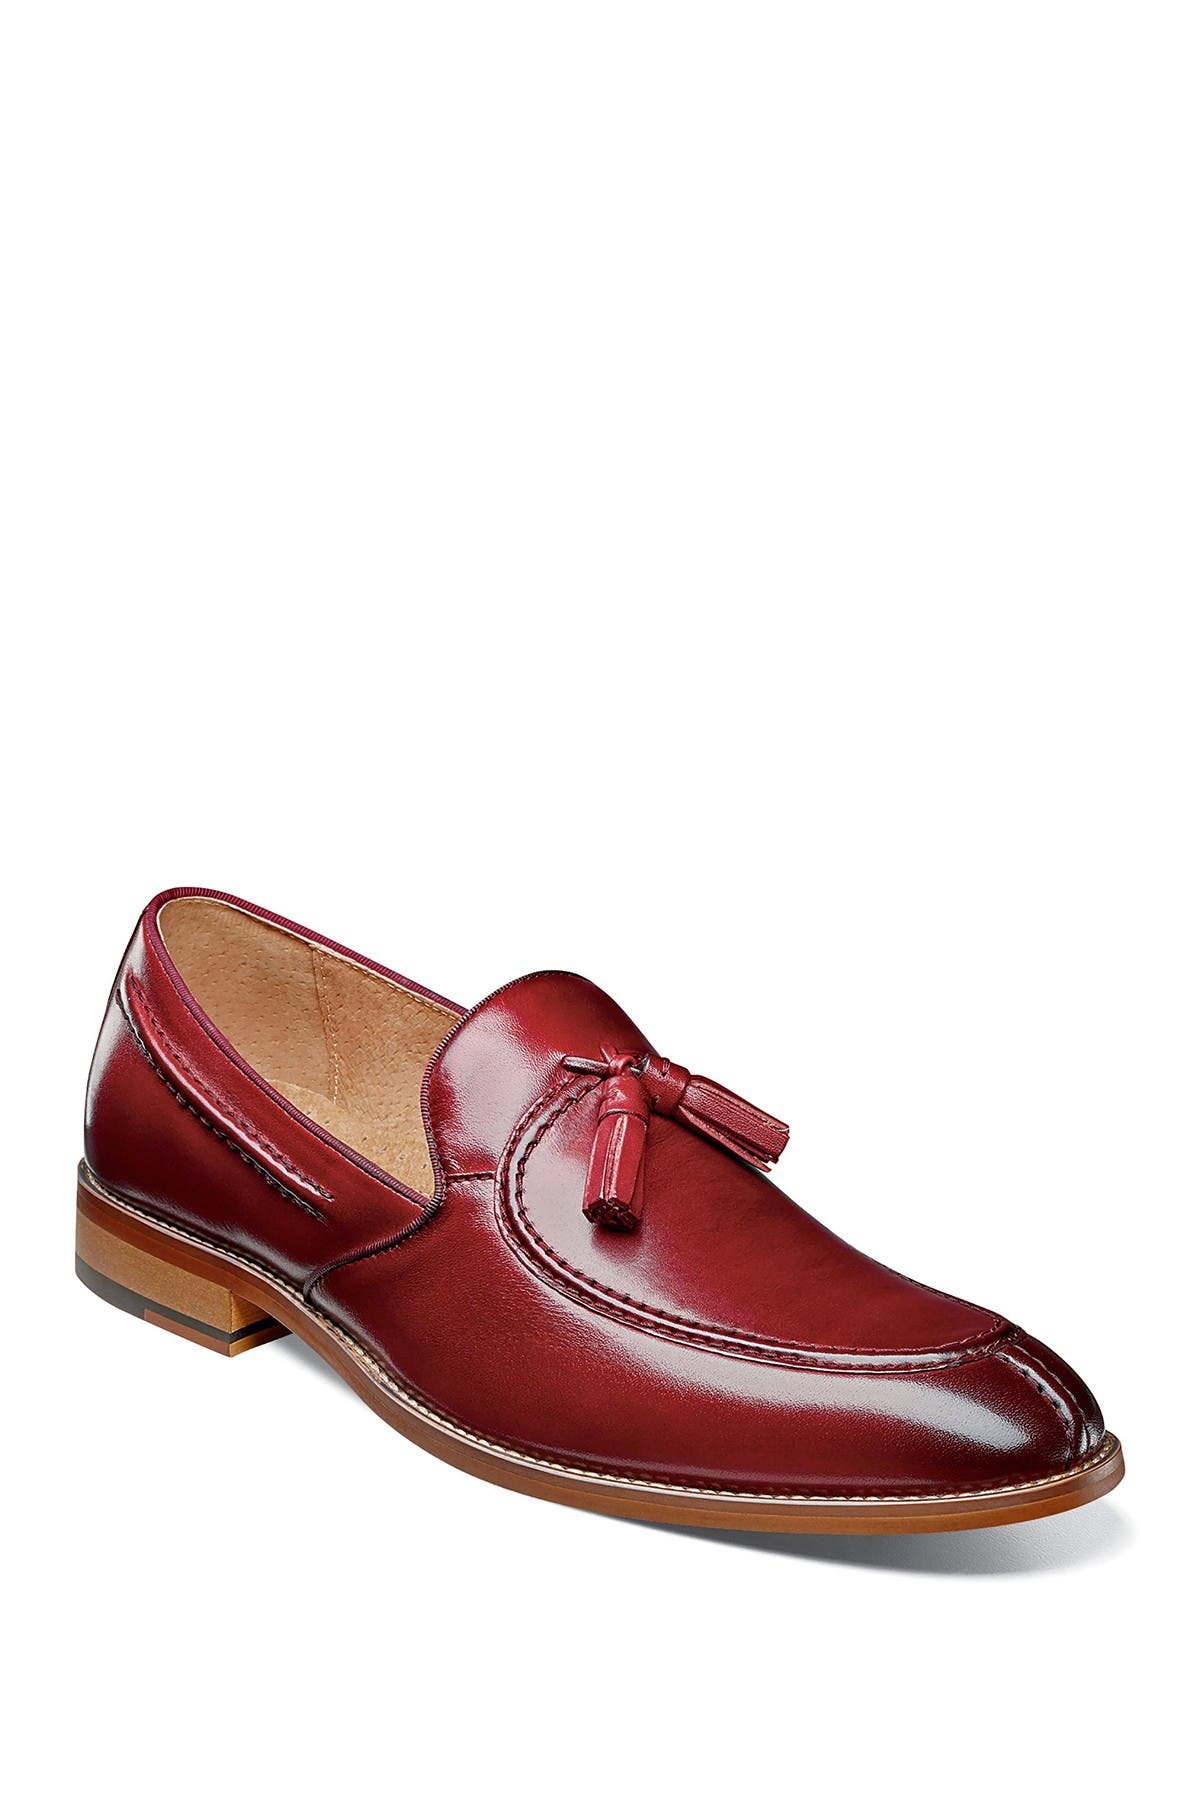 stacy adams slip on loafers